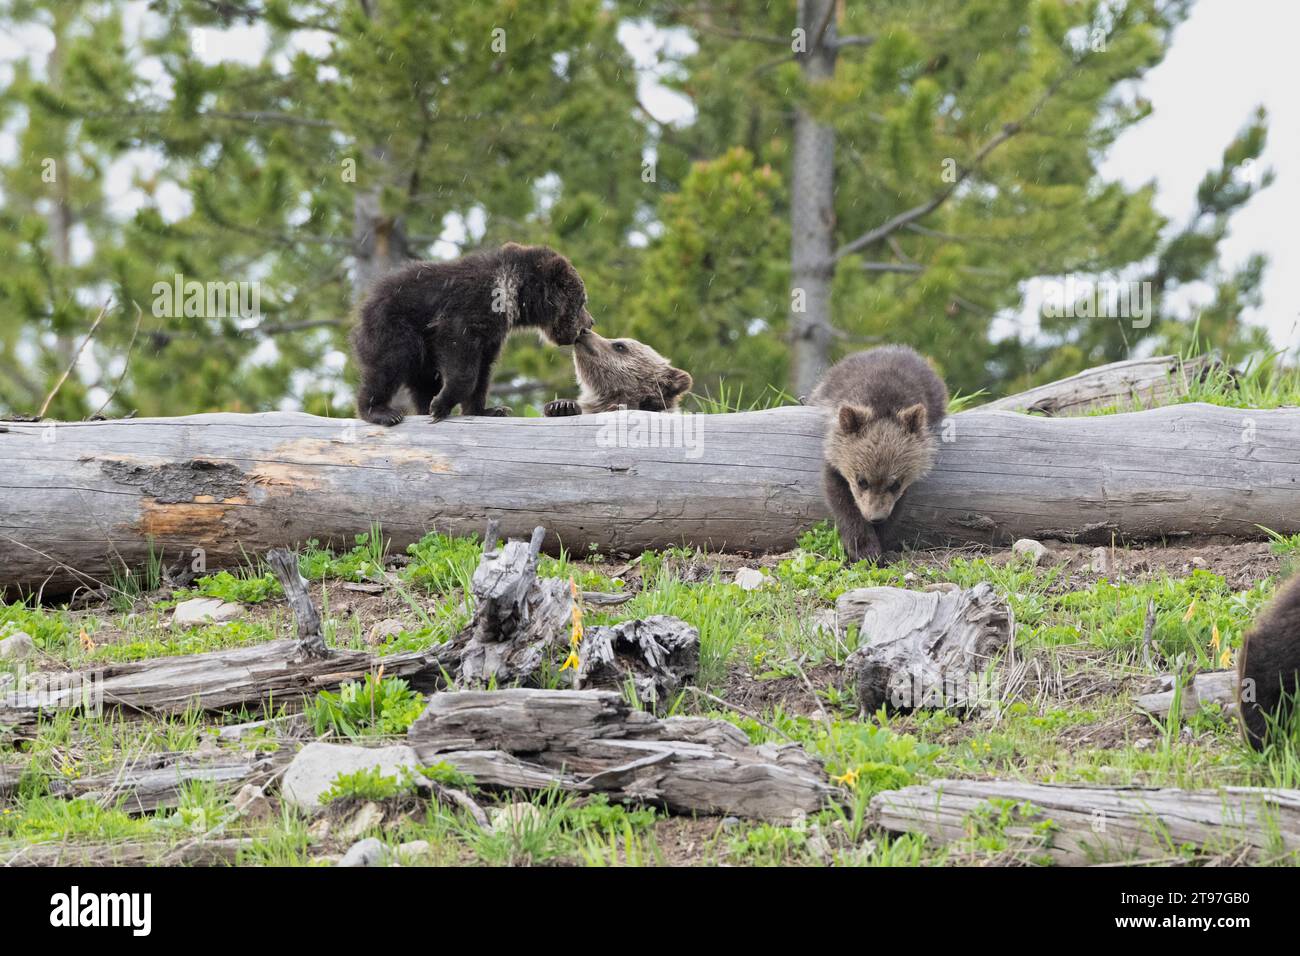 Grizzly Bear (Ursus arctos) cubs. Springtime in Yellowstone National Park, Wyoming. Stock Photo